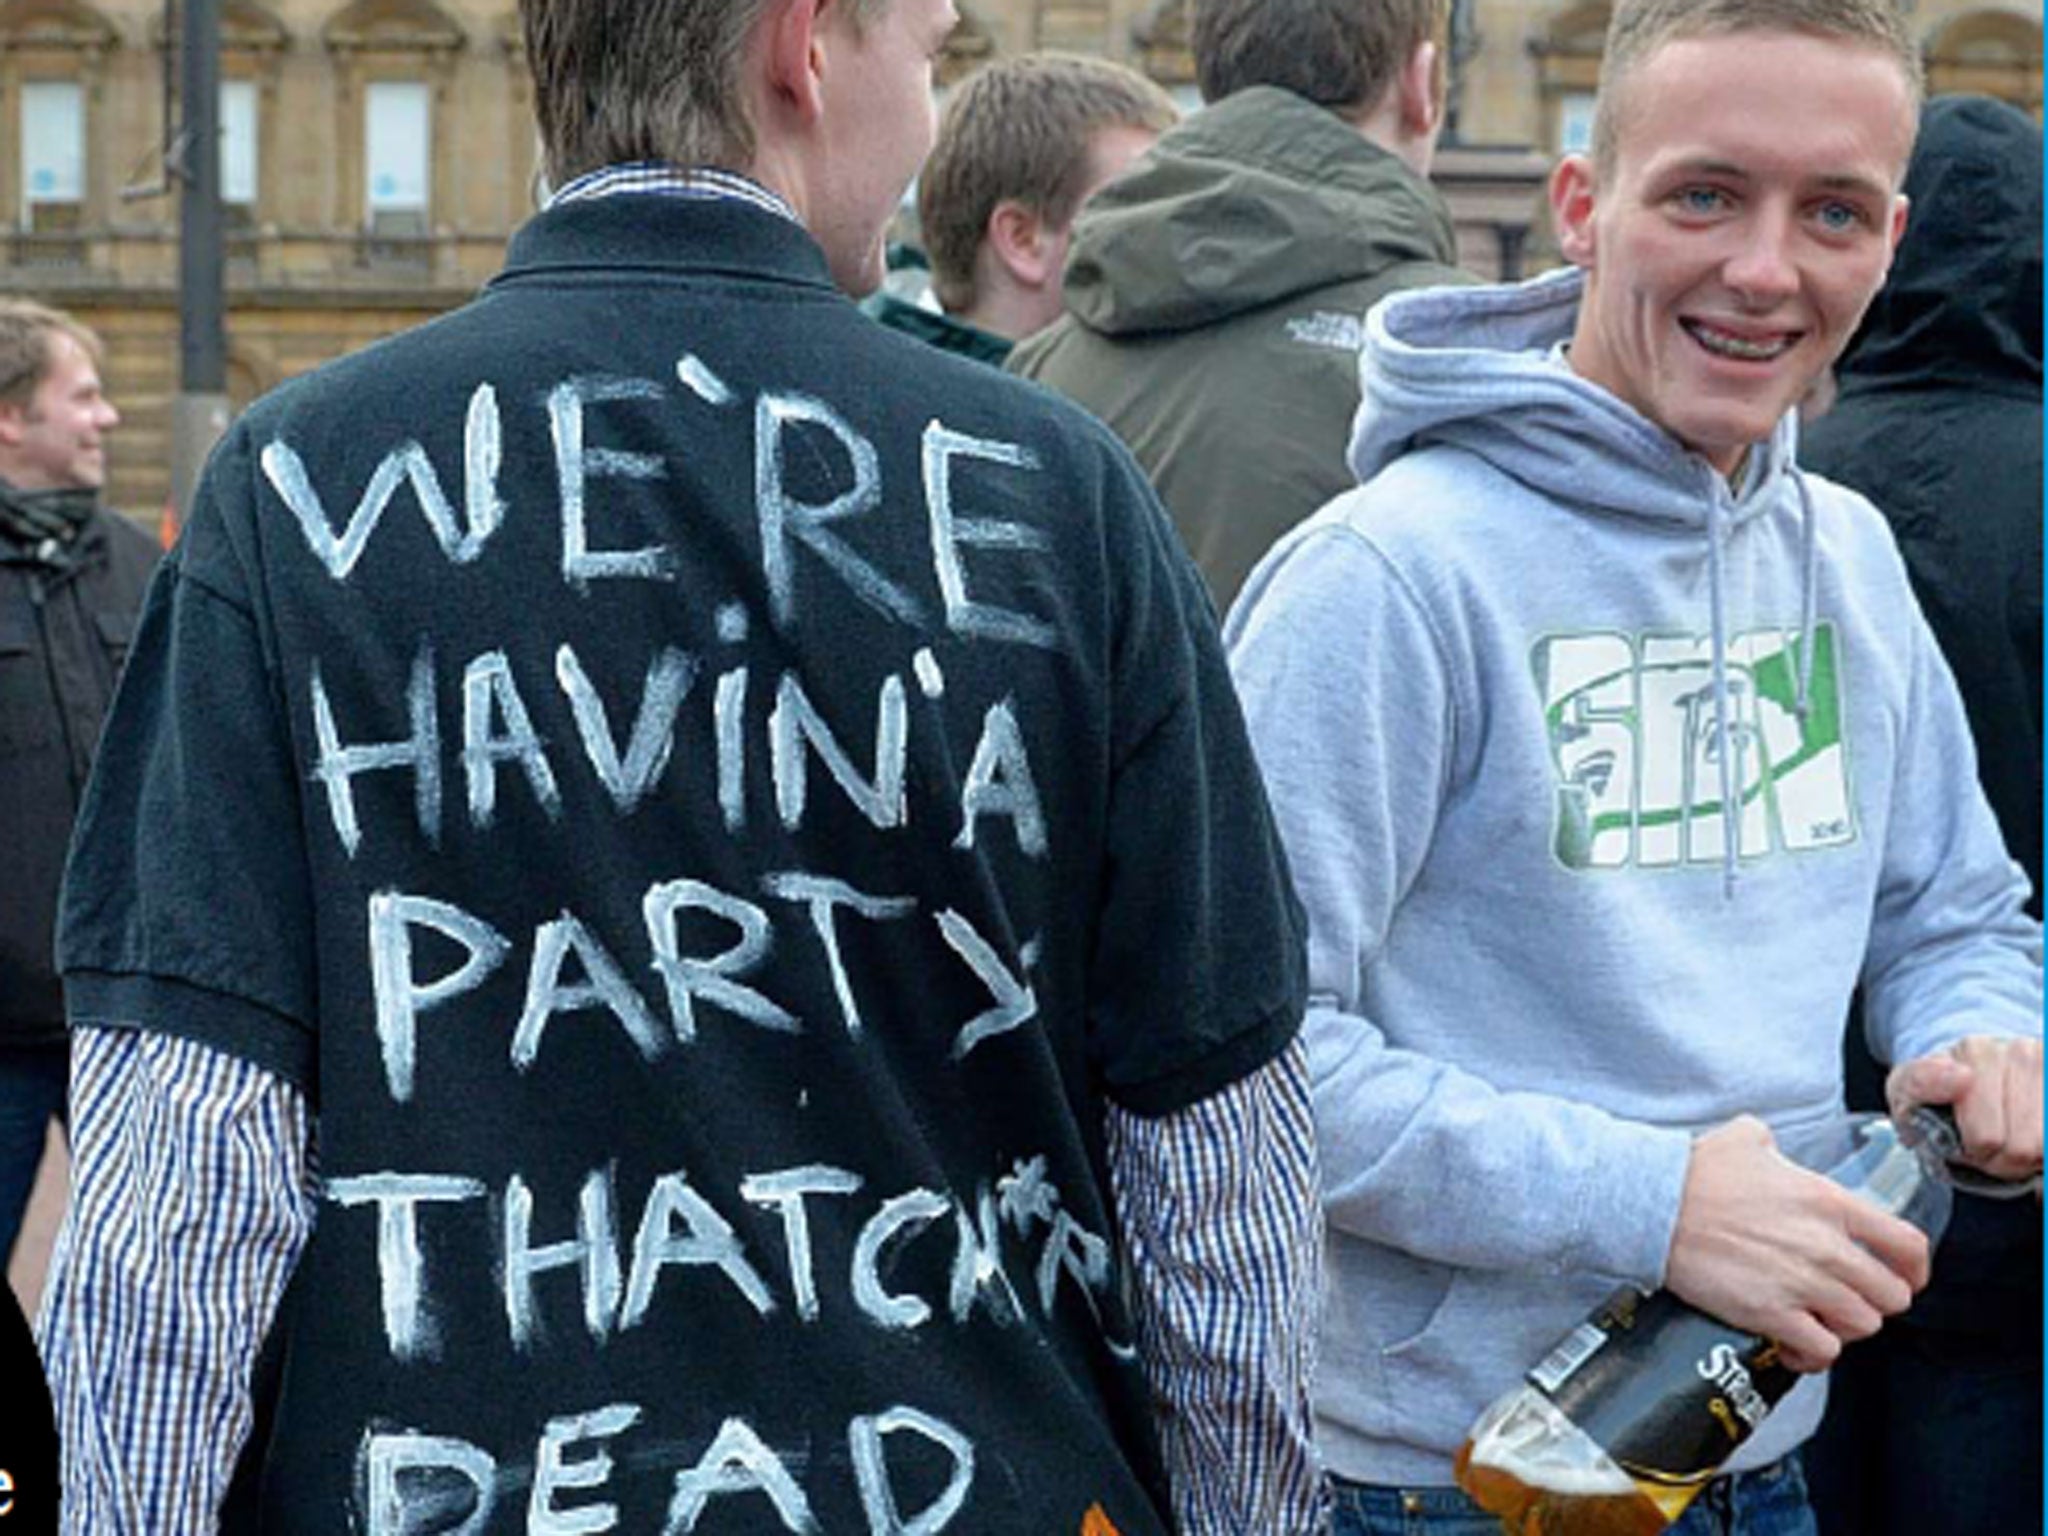 A man displays his feelings about Lady Thatcher’s death at a
gathering in George Square, Glasgow